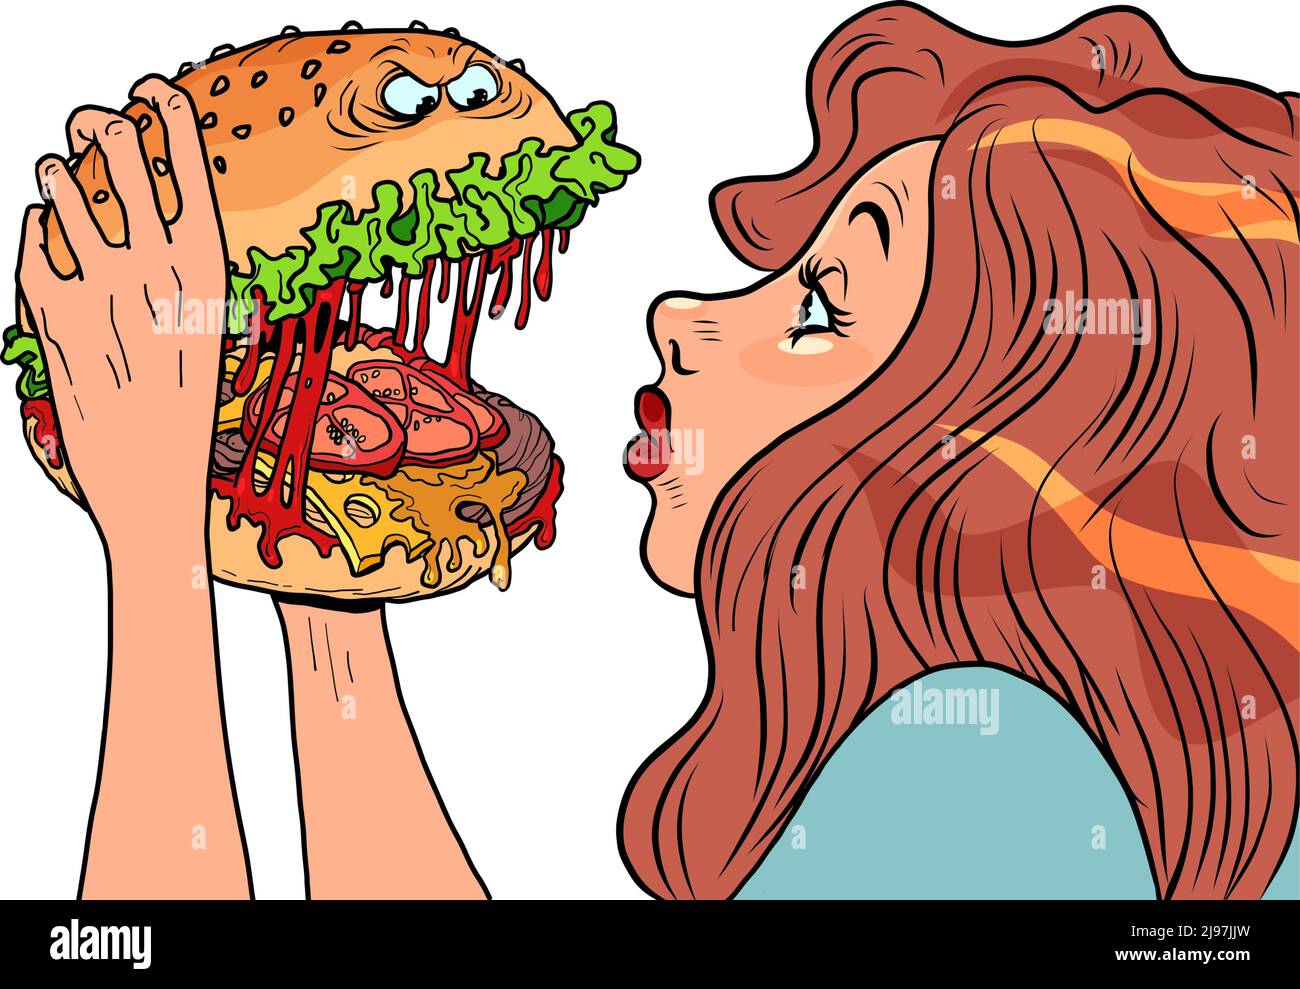 Monster burger character bites a woman in a restaurant, Fast food humor Stock Vector